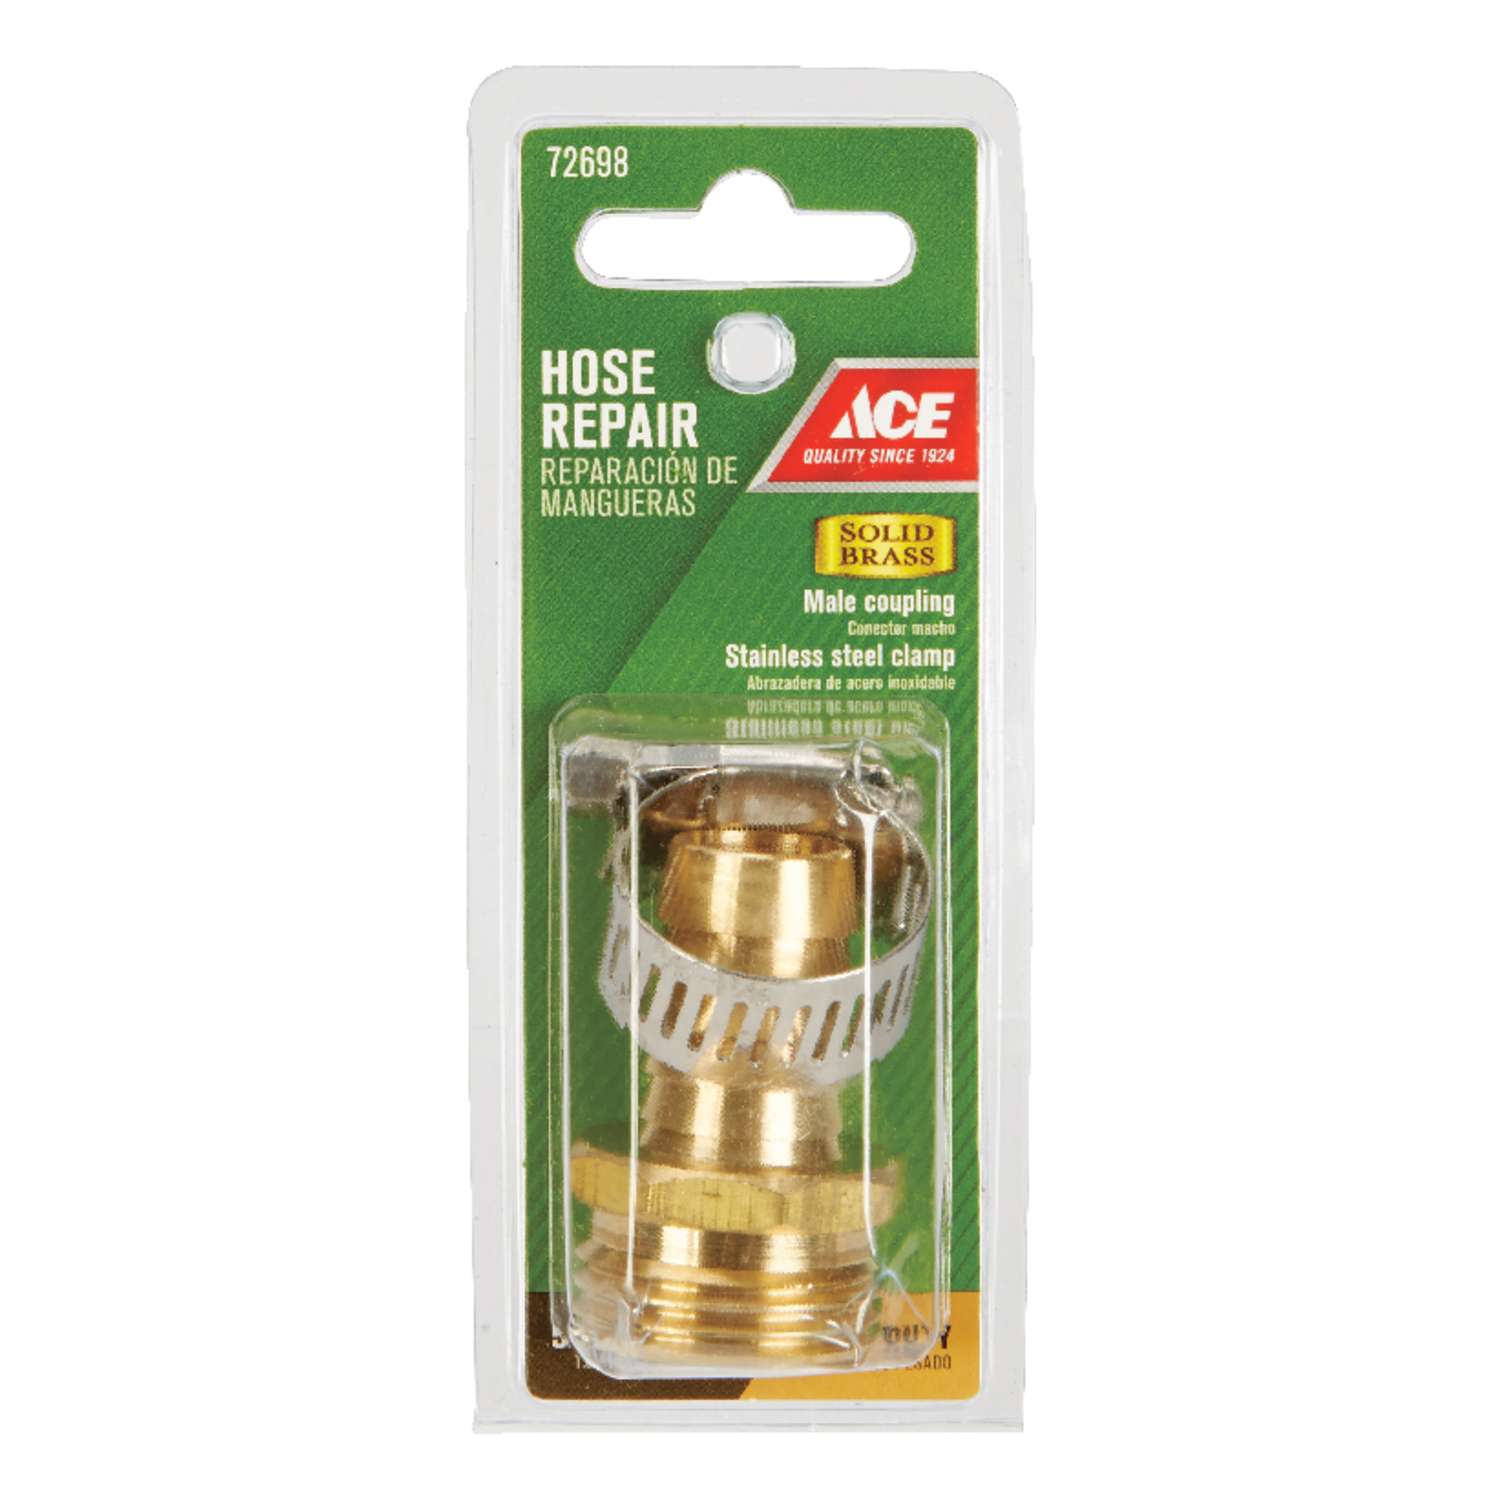 FREE SHIPPING Brass 5 pack ACE 72698 3/4" X 5/8" Barbed Hose Repair 